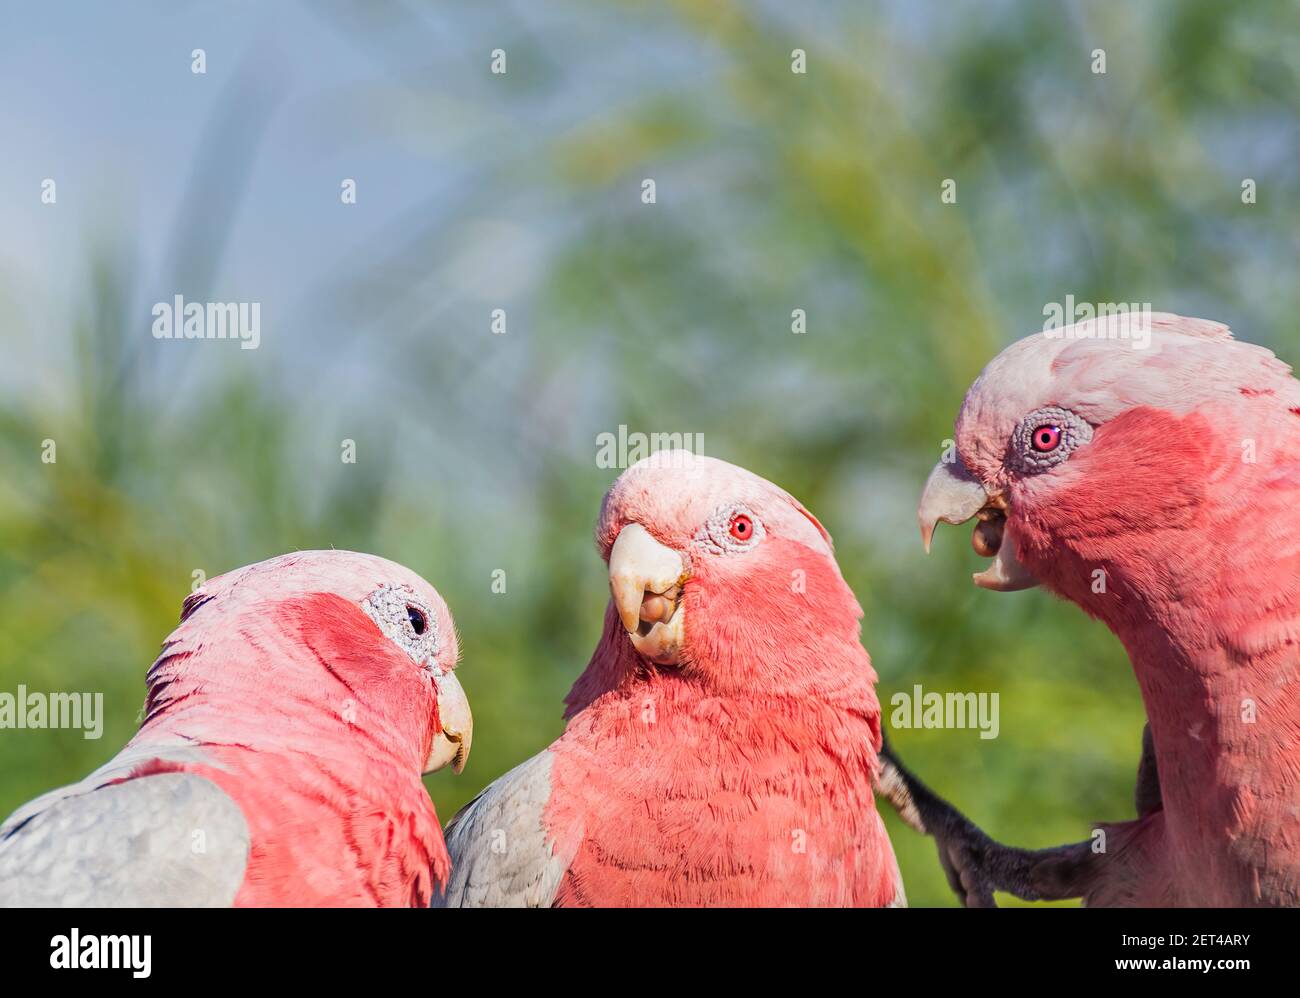 Three galah birds in a  tree looking at each other, Australia Stock Photo